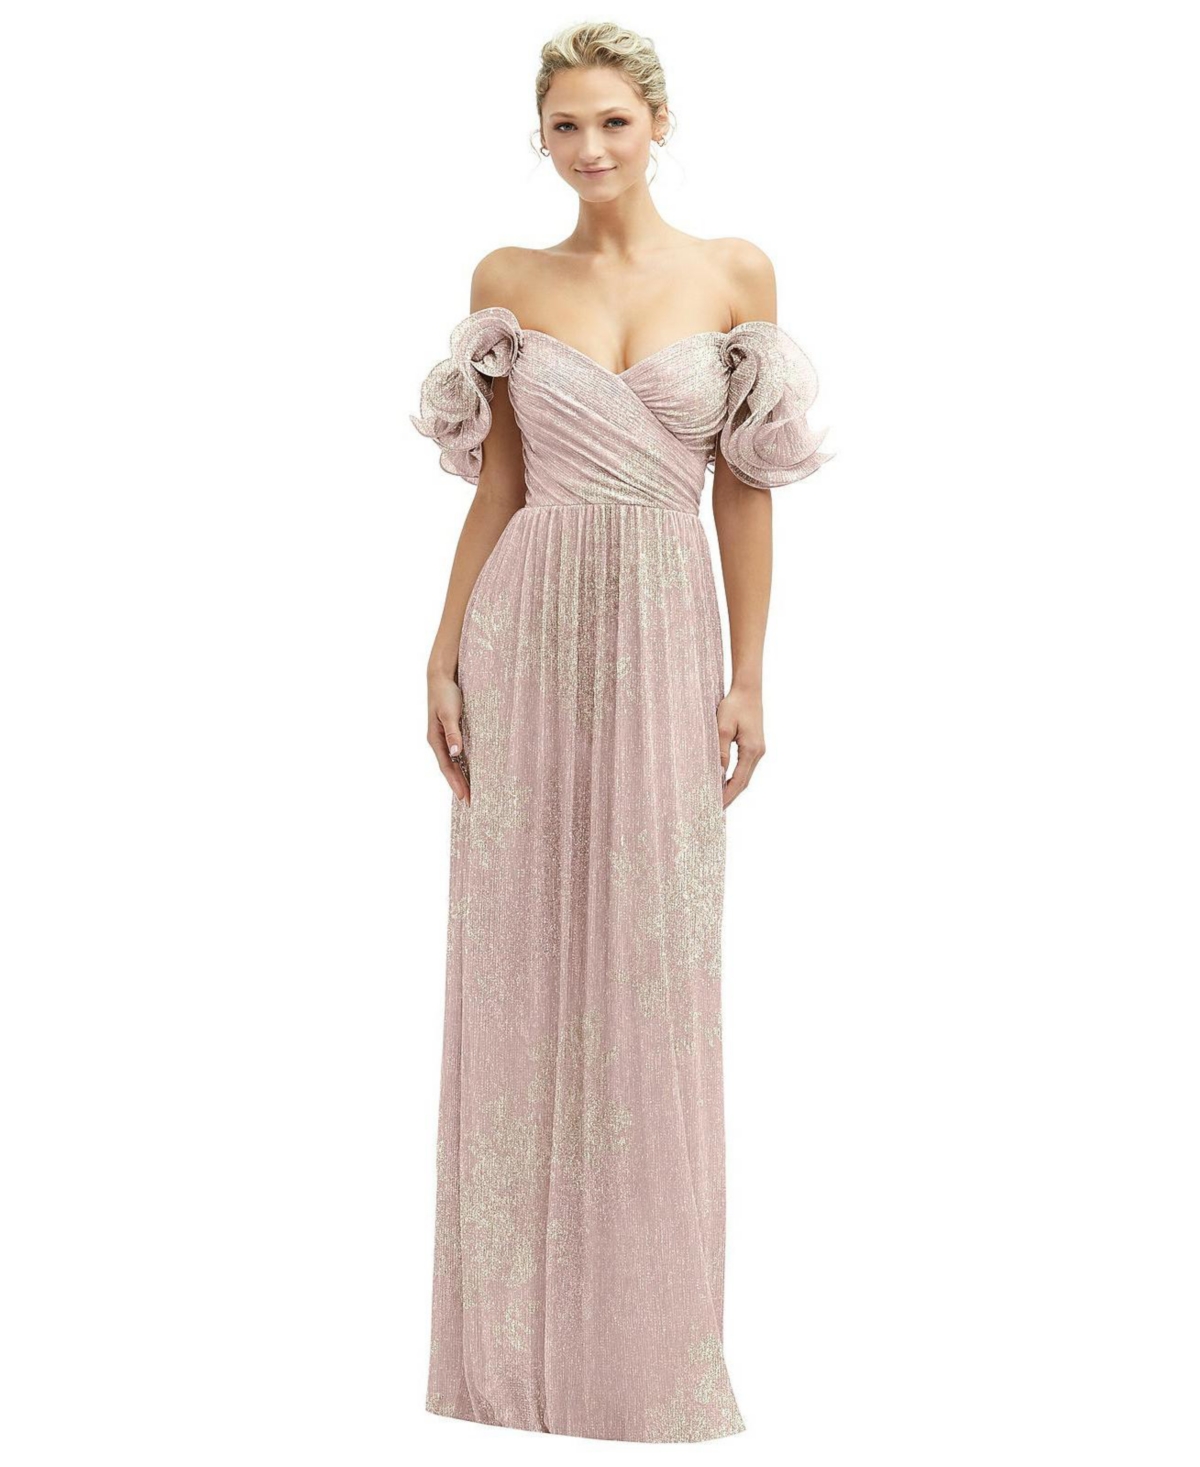 Womens Dramatic Ruffle Edge Convertible Strap Metallic Pleated Maxi Dress with Floral Gold Foil Print - Pink gold foil